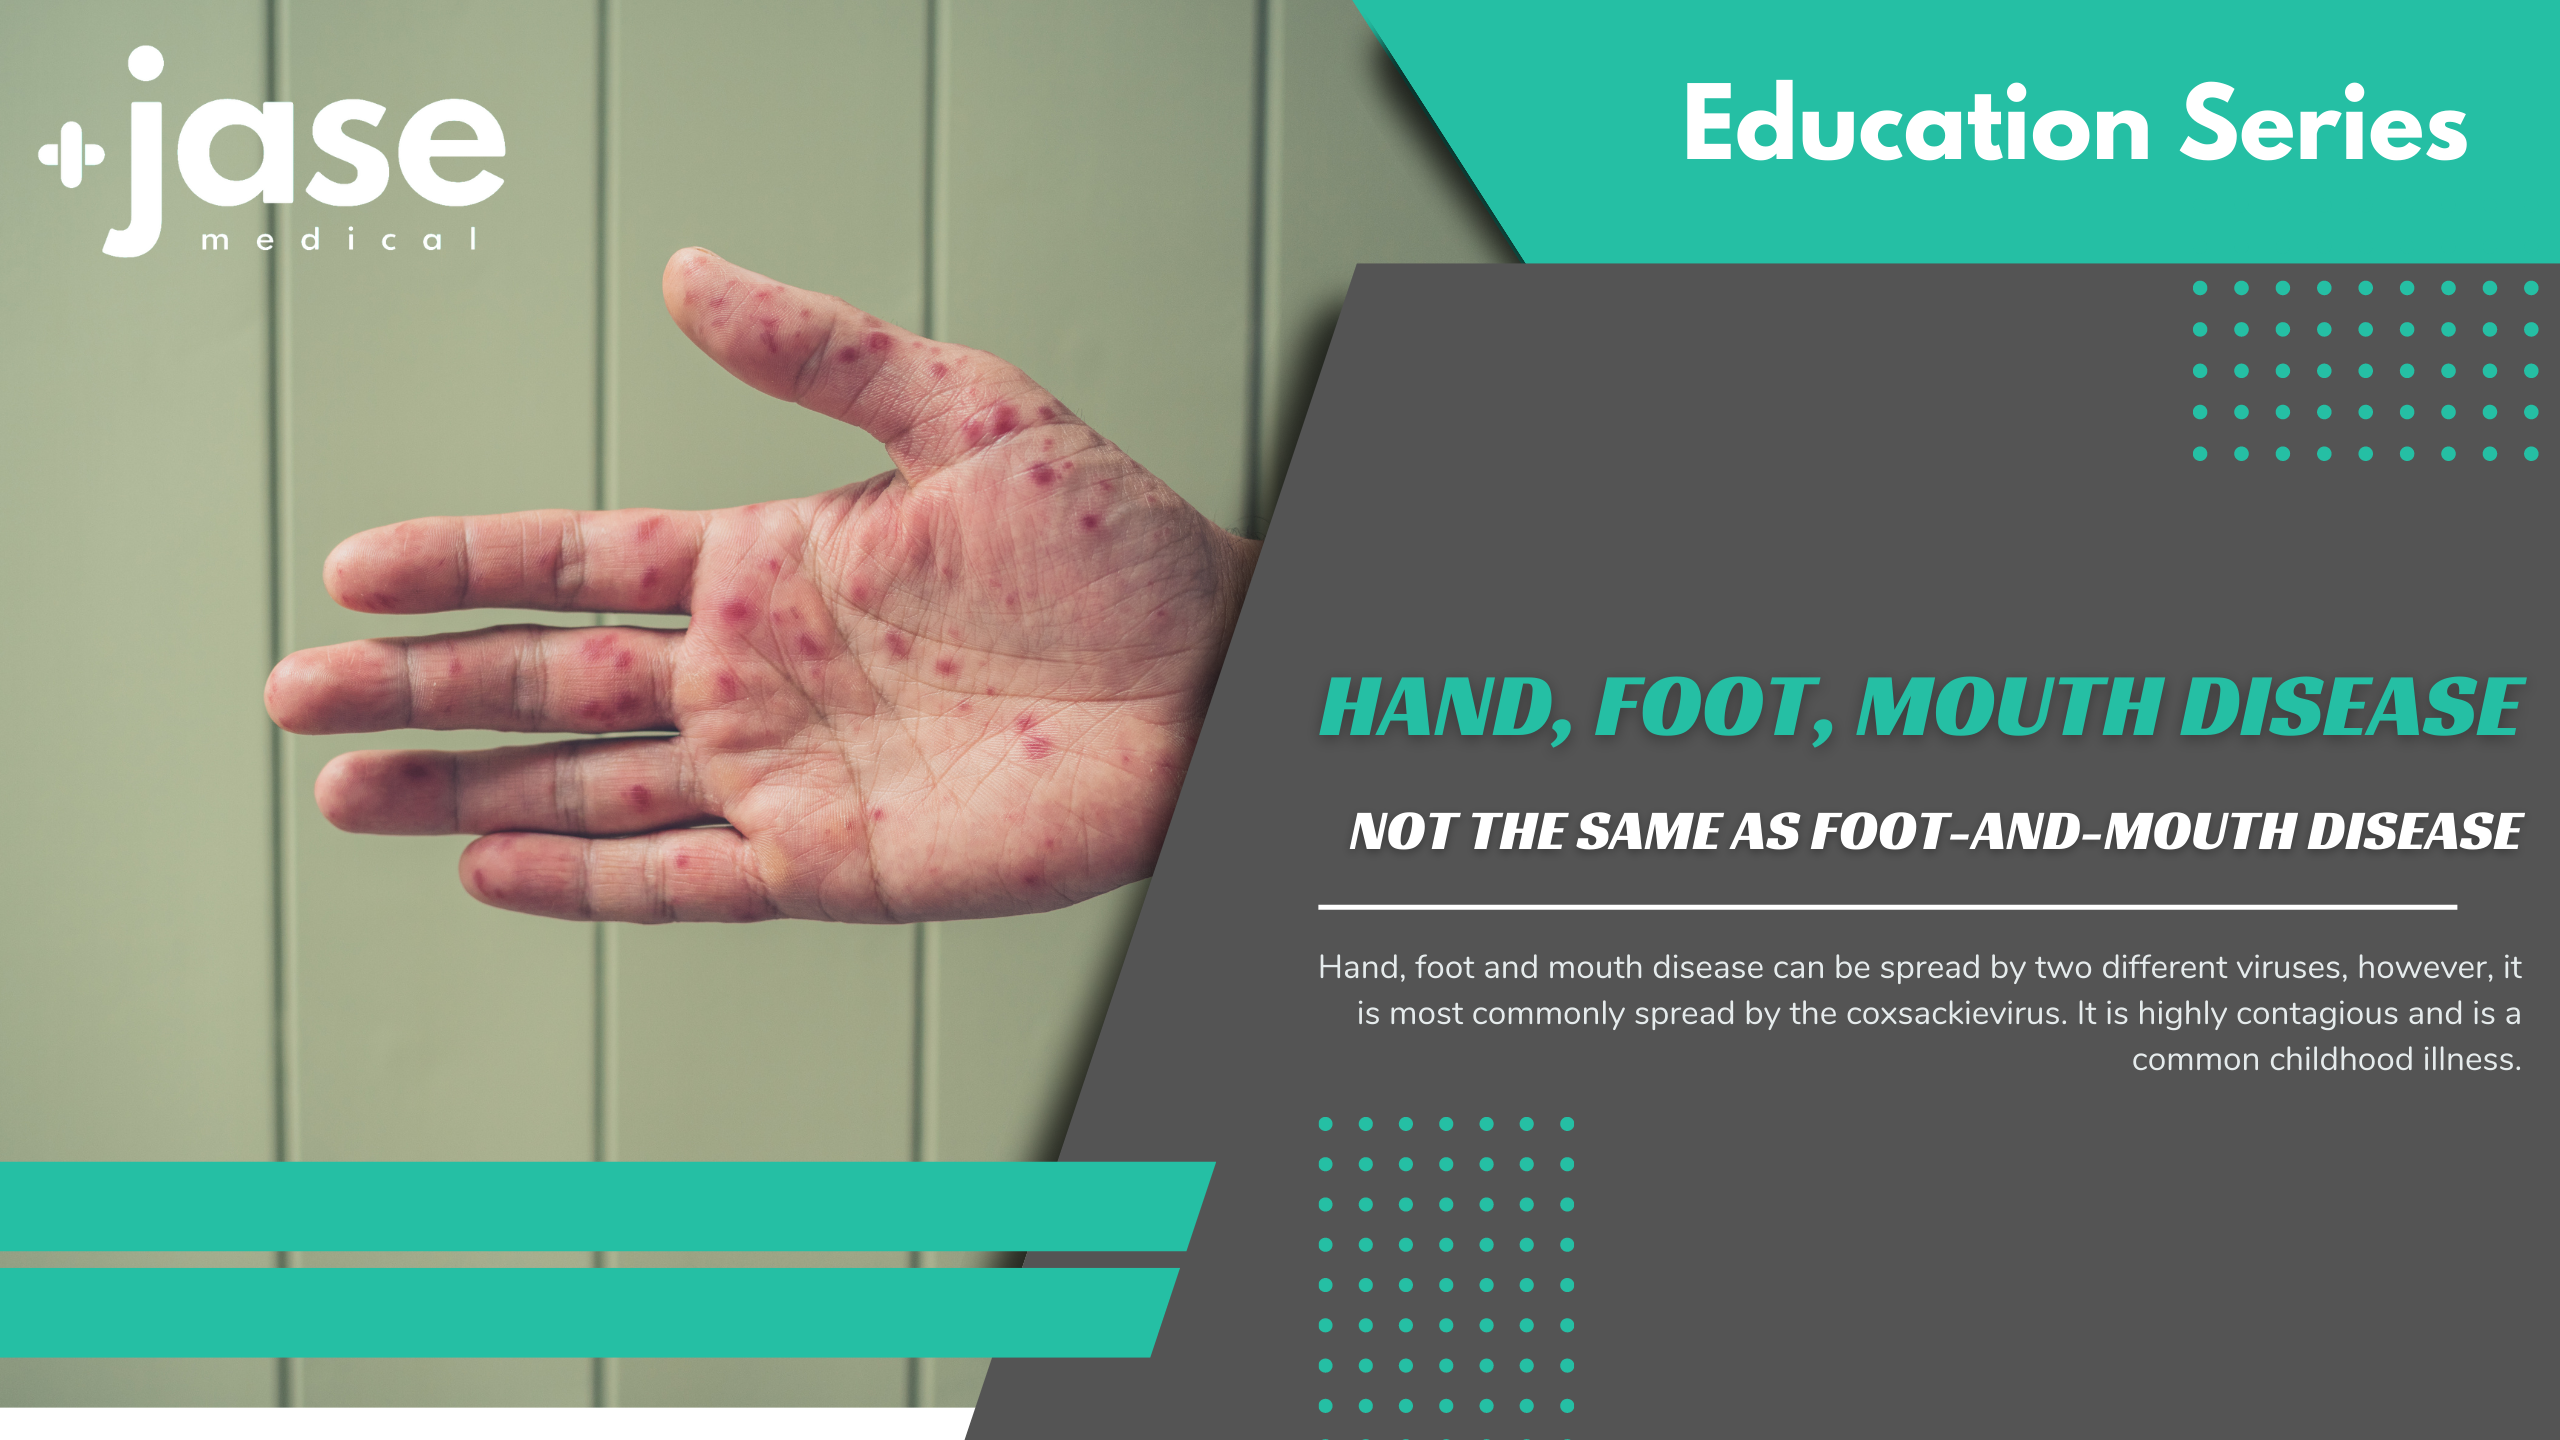 Hand, Foot, Mouth Disease